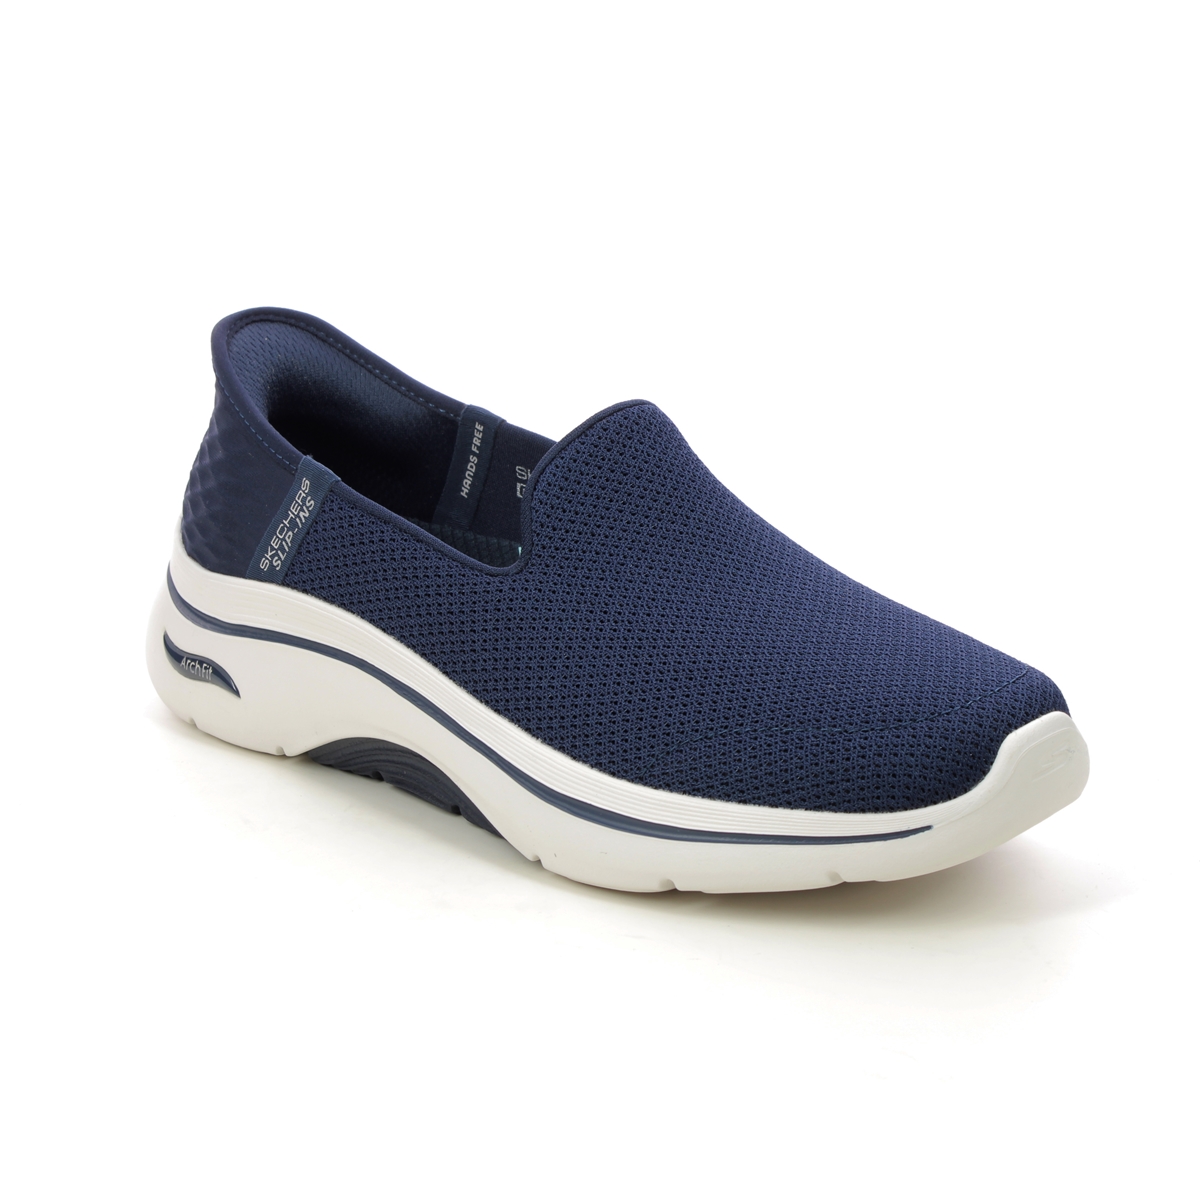 Skechers Slip Ins Arch 2 NVW Navy Womens trainers 125315 in a Plain Textile in Size 7